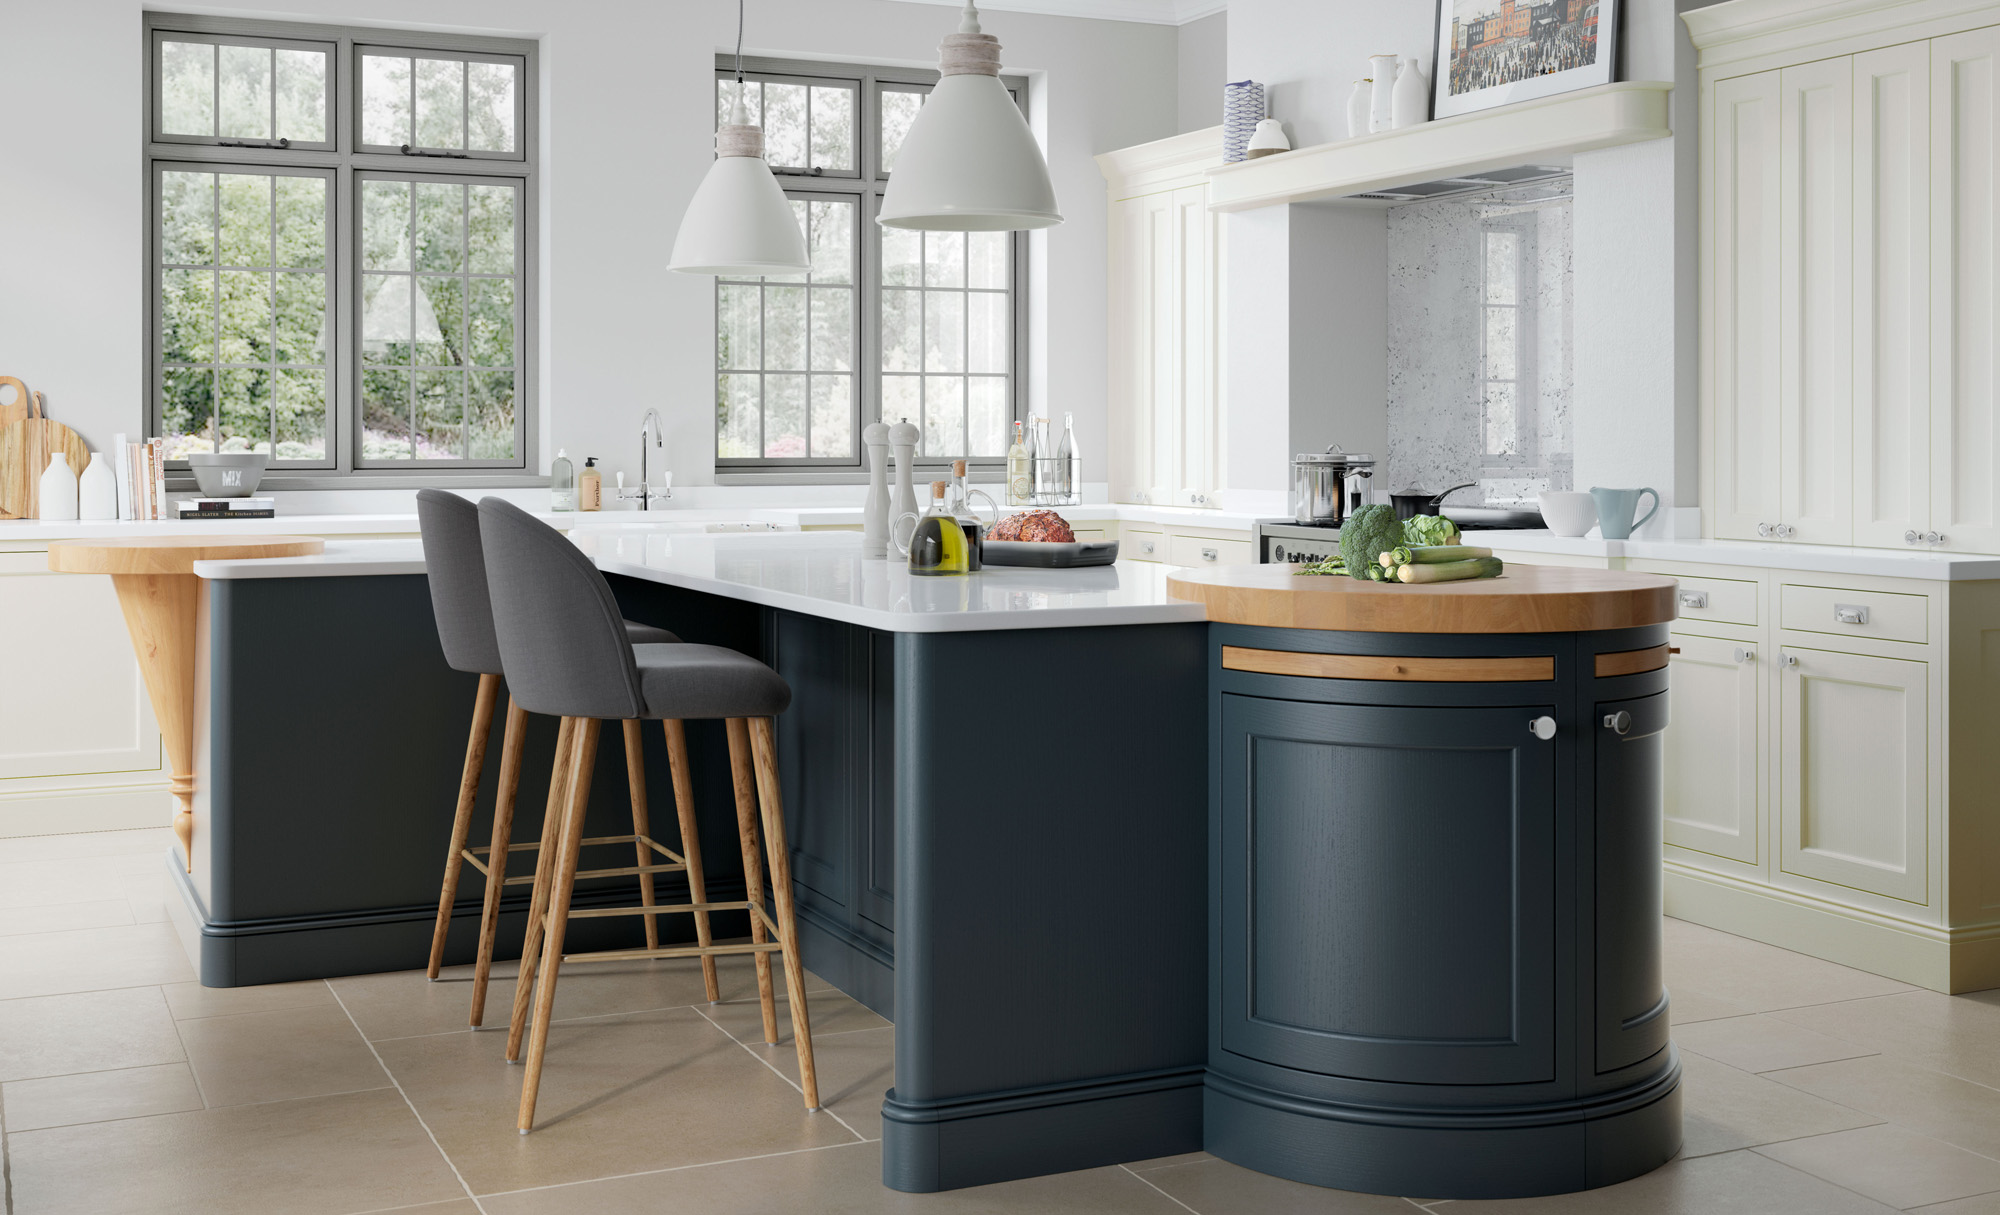 Belgravia Midnight Blue & Porcelain, Belgravia Inframe Painted consists of a 20mm overpainted, solid ash frame with flat, veneered ash centre panel and internal moulding. Grain visible. Midnight Blue using our colour matching service.